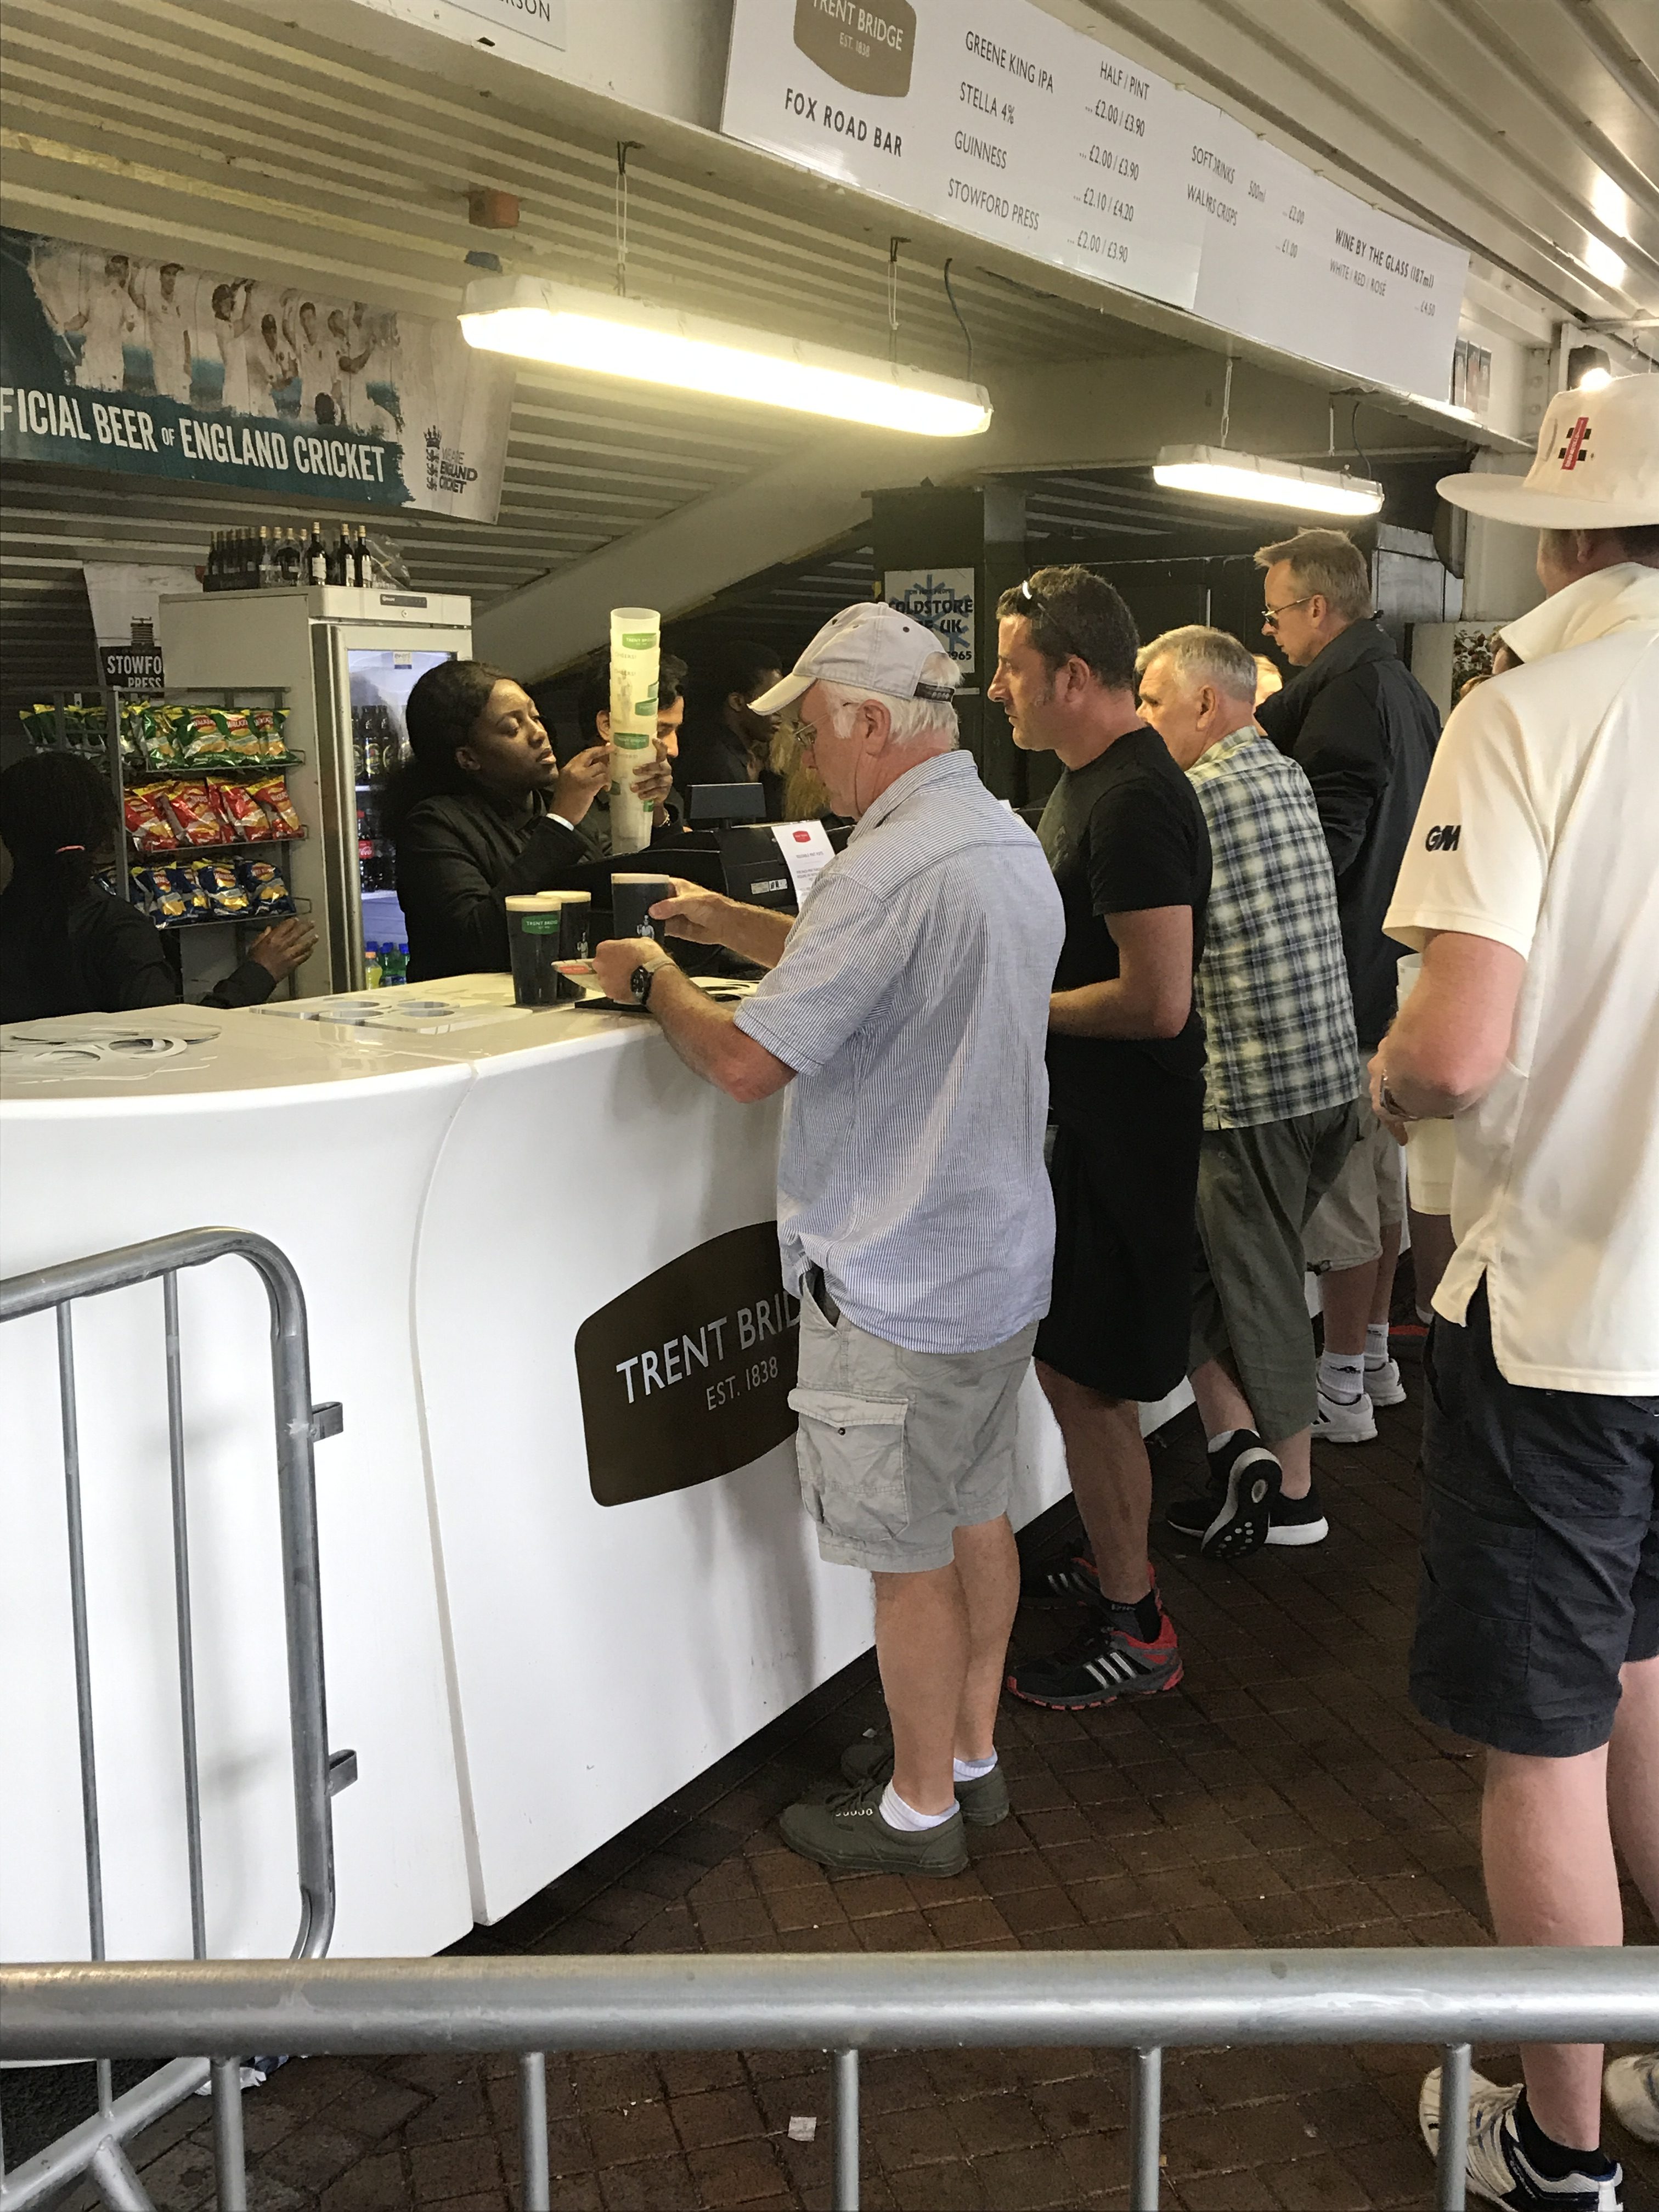 Cricket Bars -serving the fans